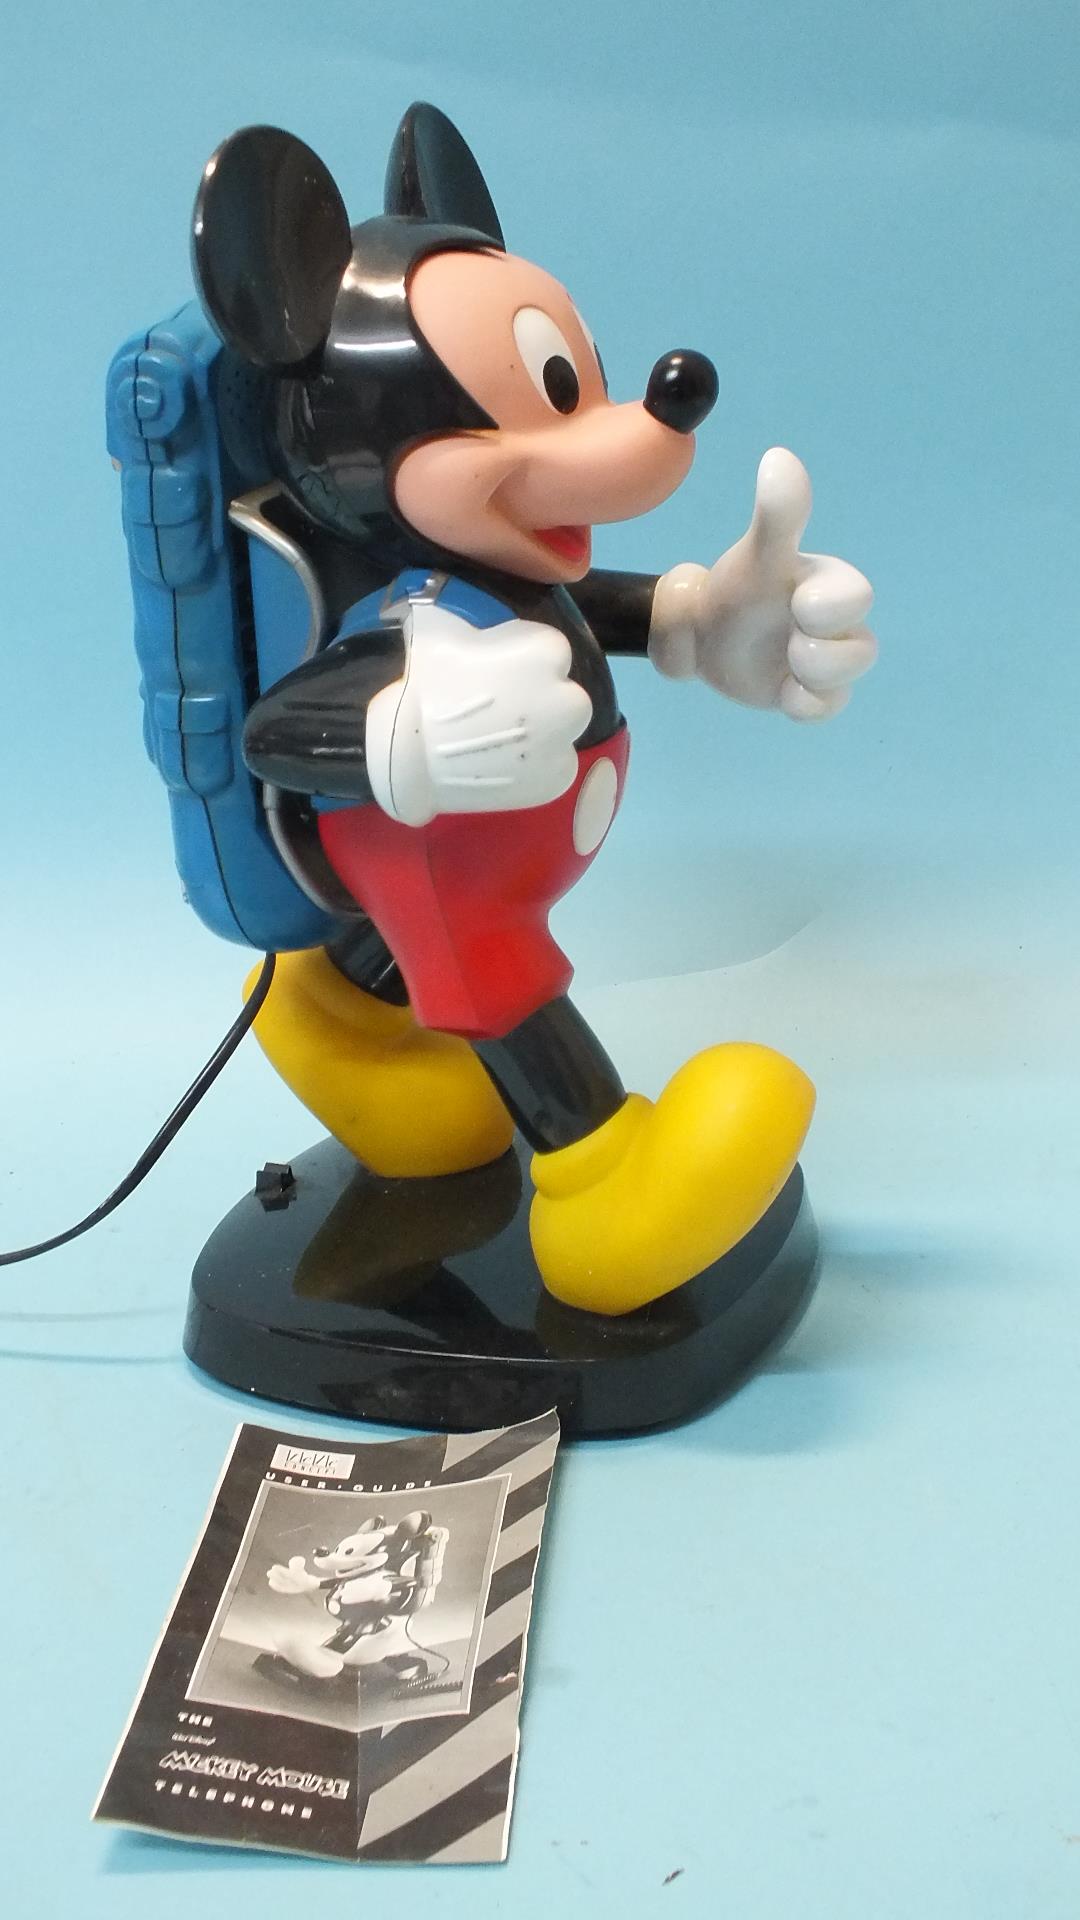 A Mickey Mouse telephone by Tele-Concept, Tyco, 35cm high, with leaflet.